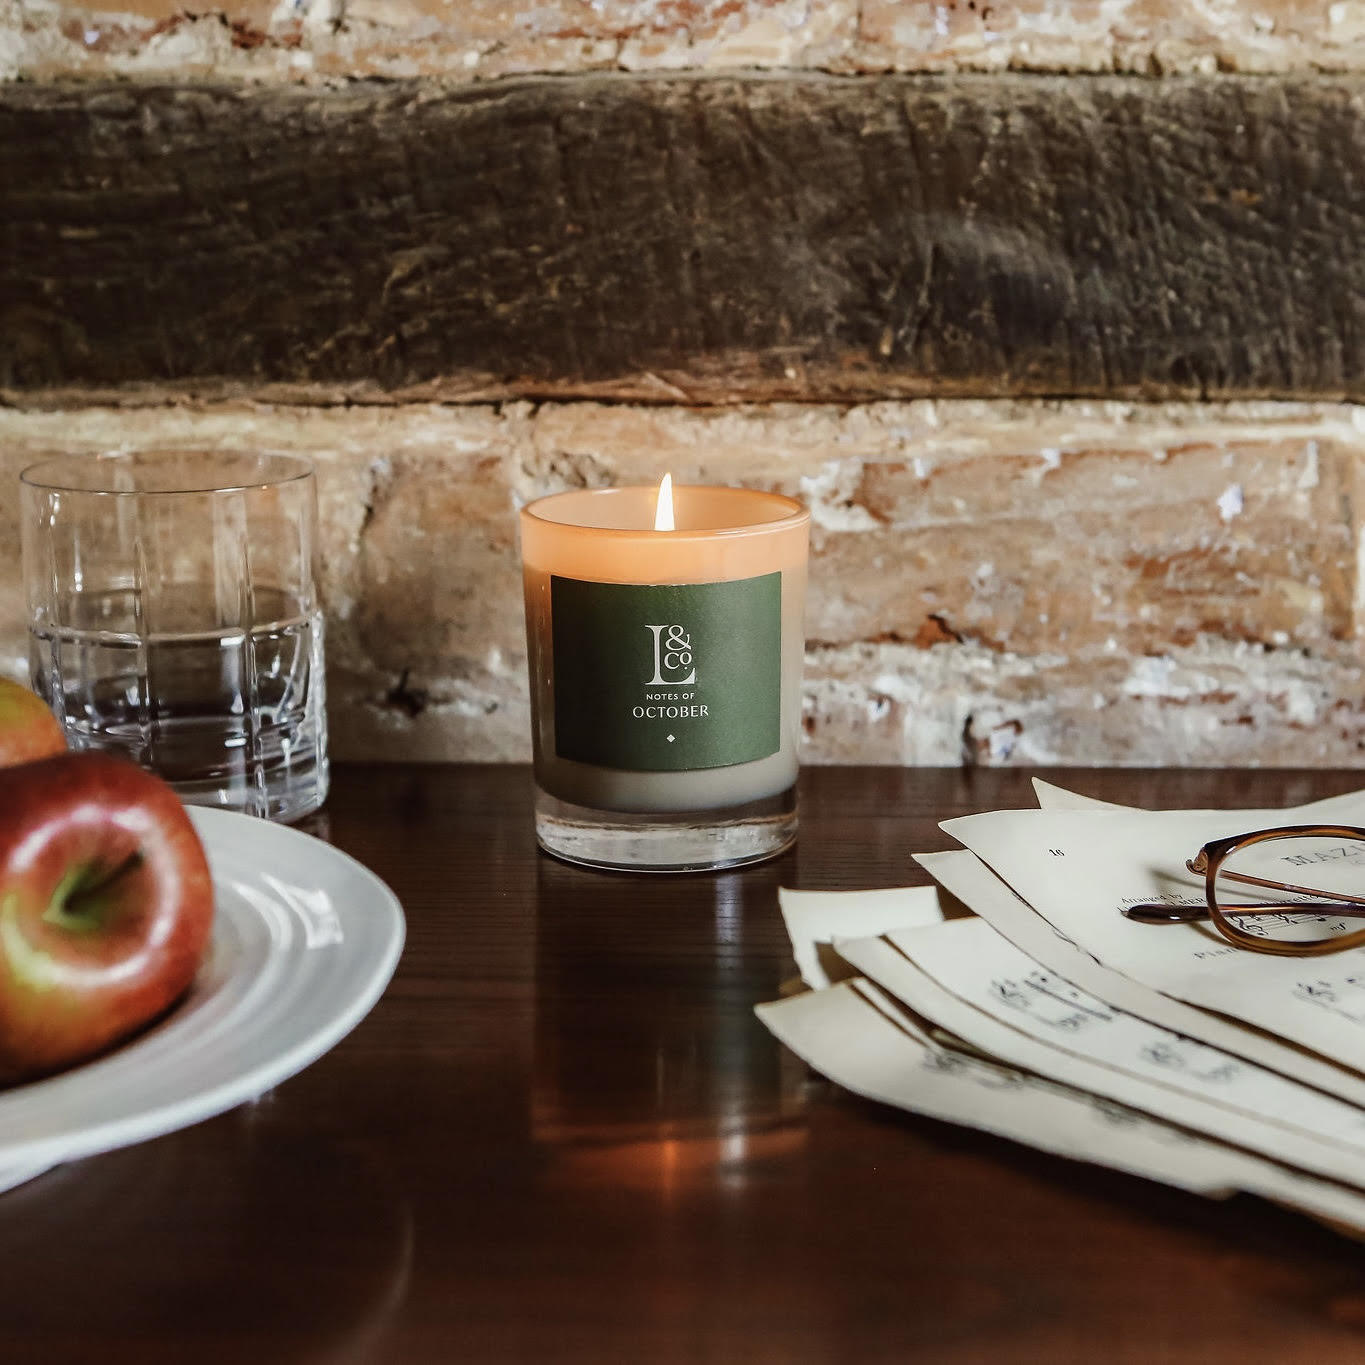 Loriest Notes of October luxury scented candle delightfully captures the invigorating woodland scent of moss and juniper. 215g of plant-based sustainable wax, each candle burns for around 60 hours. Hand-poured in the UK.